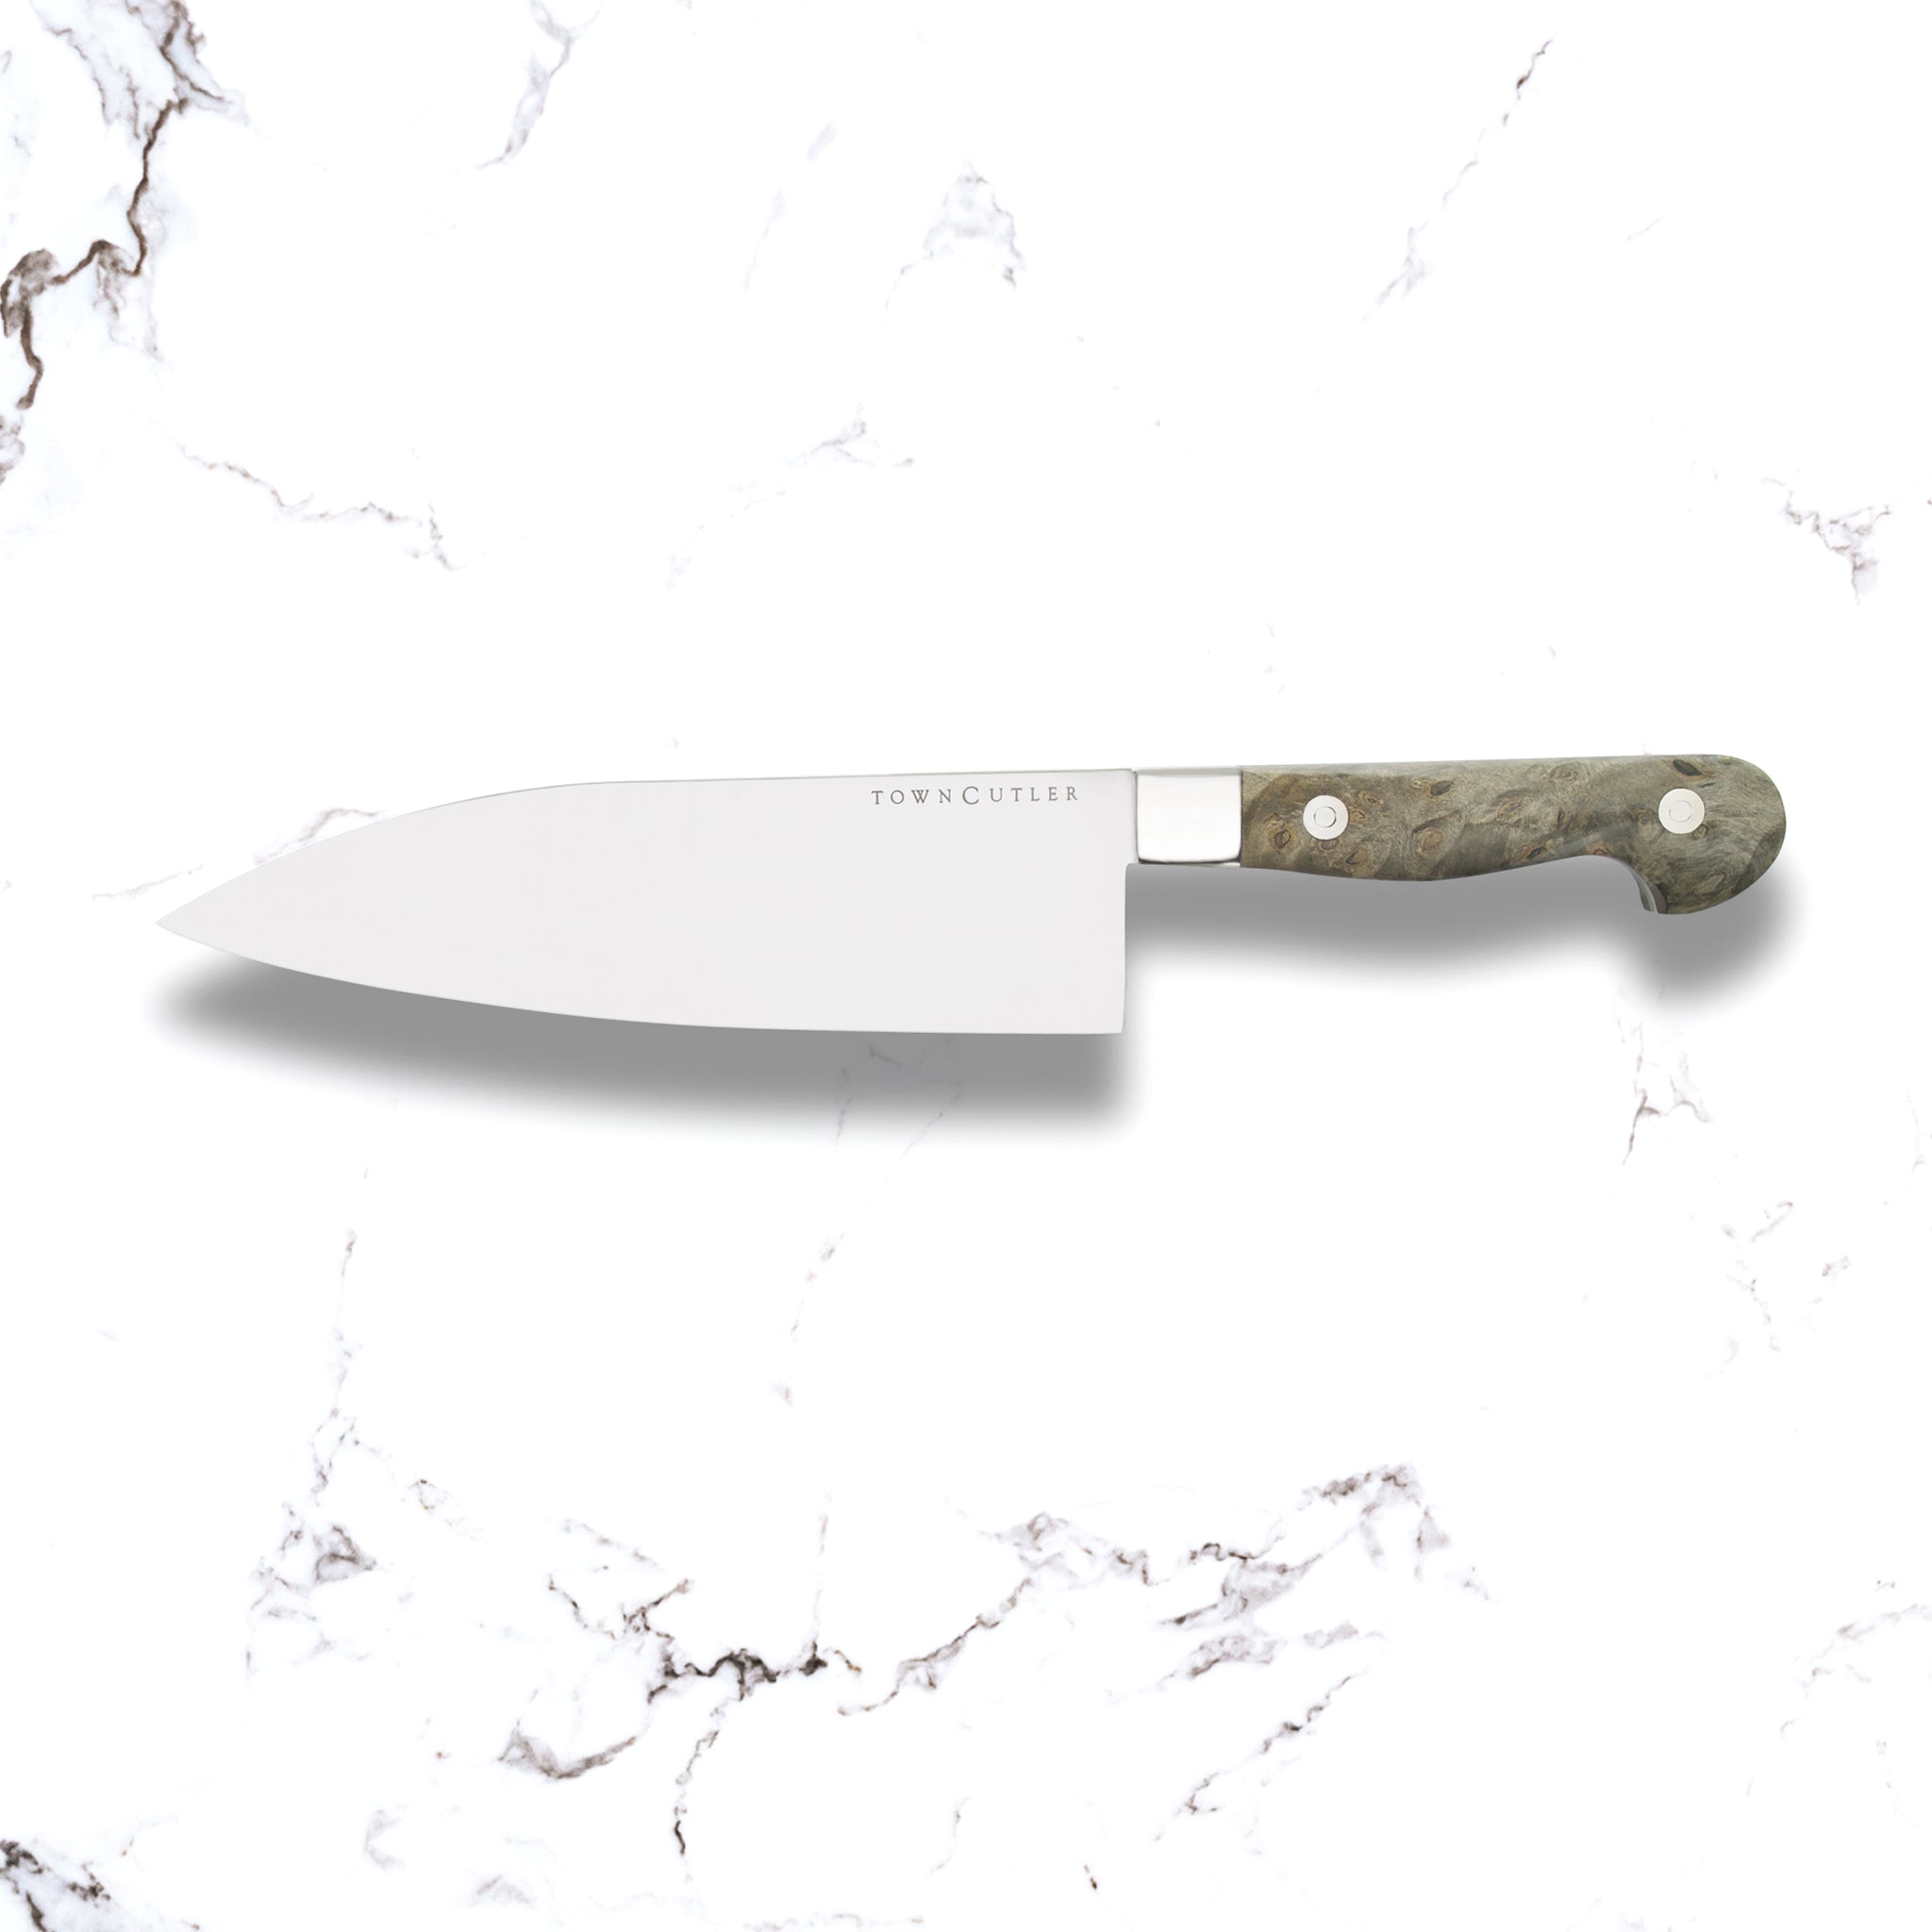 7" Chef Knife - Classic - Town Cutler. Stainless steel blade with Buckeye Burl handle, bolster, and full tang.